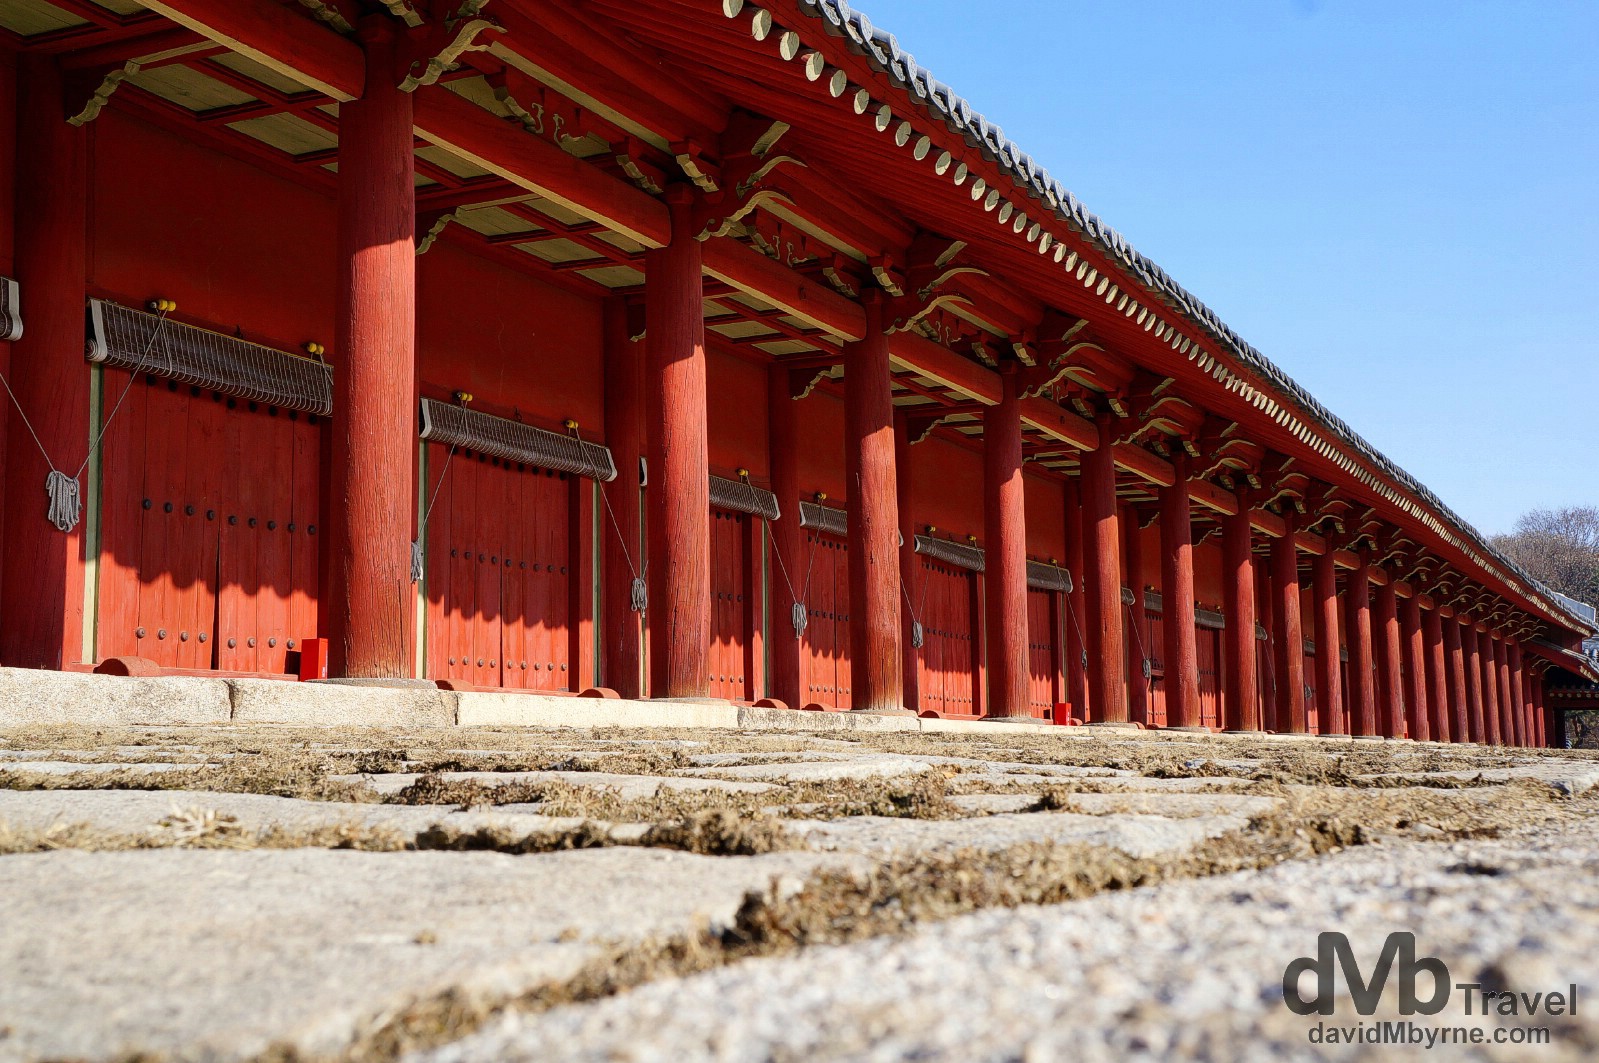 Jeongjeon, the largest building in the UNESCO listed Jongmyo Shrine in Seoul, South Korea. January 18th, 2014.